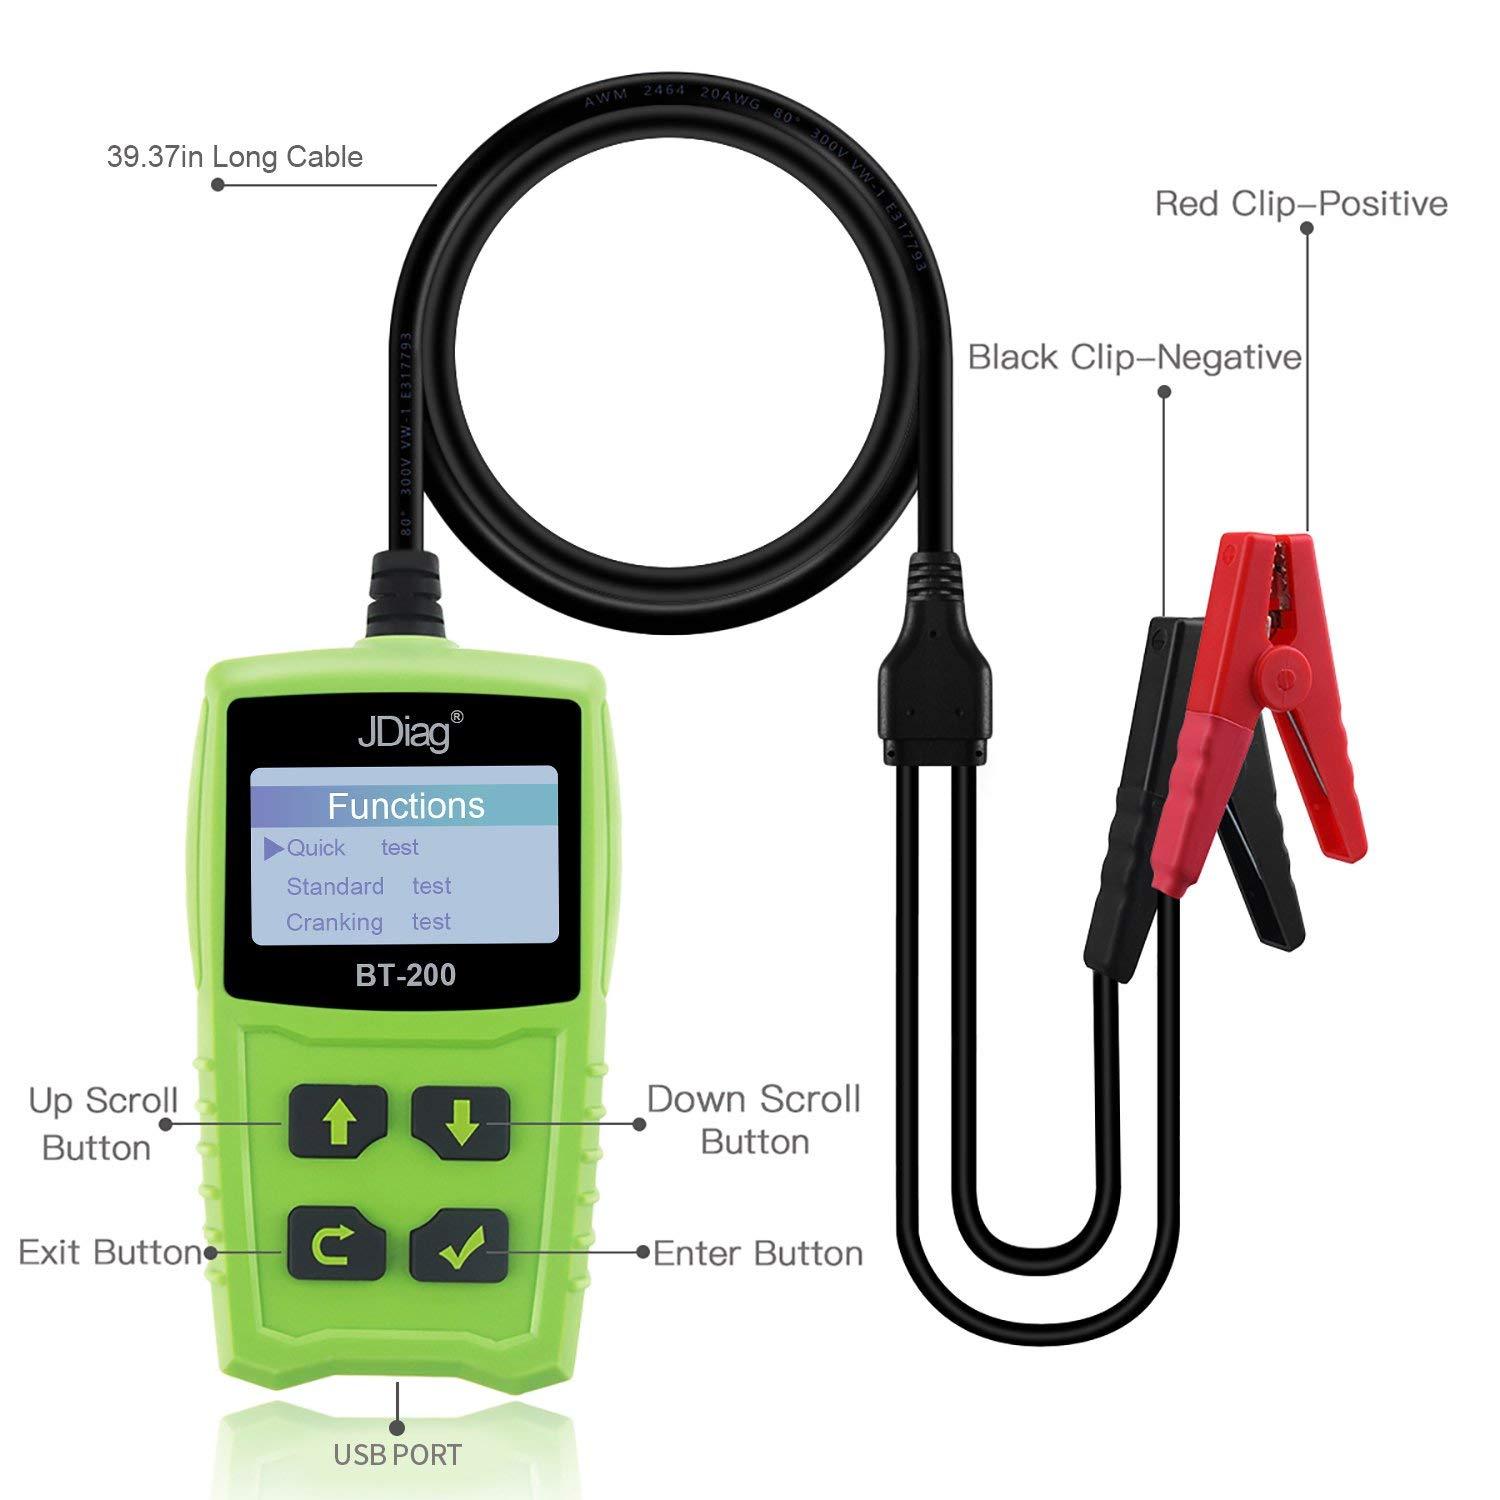 100AH BT200 Automotive Load Battery Tester Digital Analyzer Bad Cell Test Tool for Car/Boat/Motorcycle and More